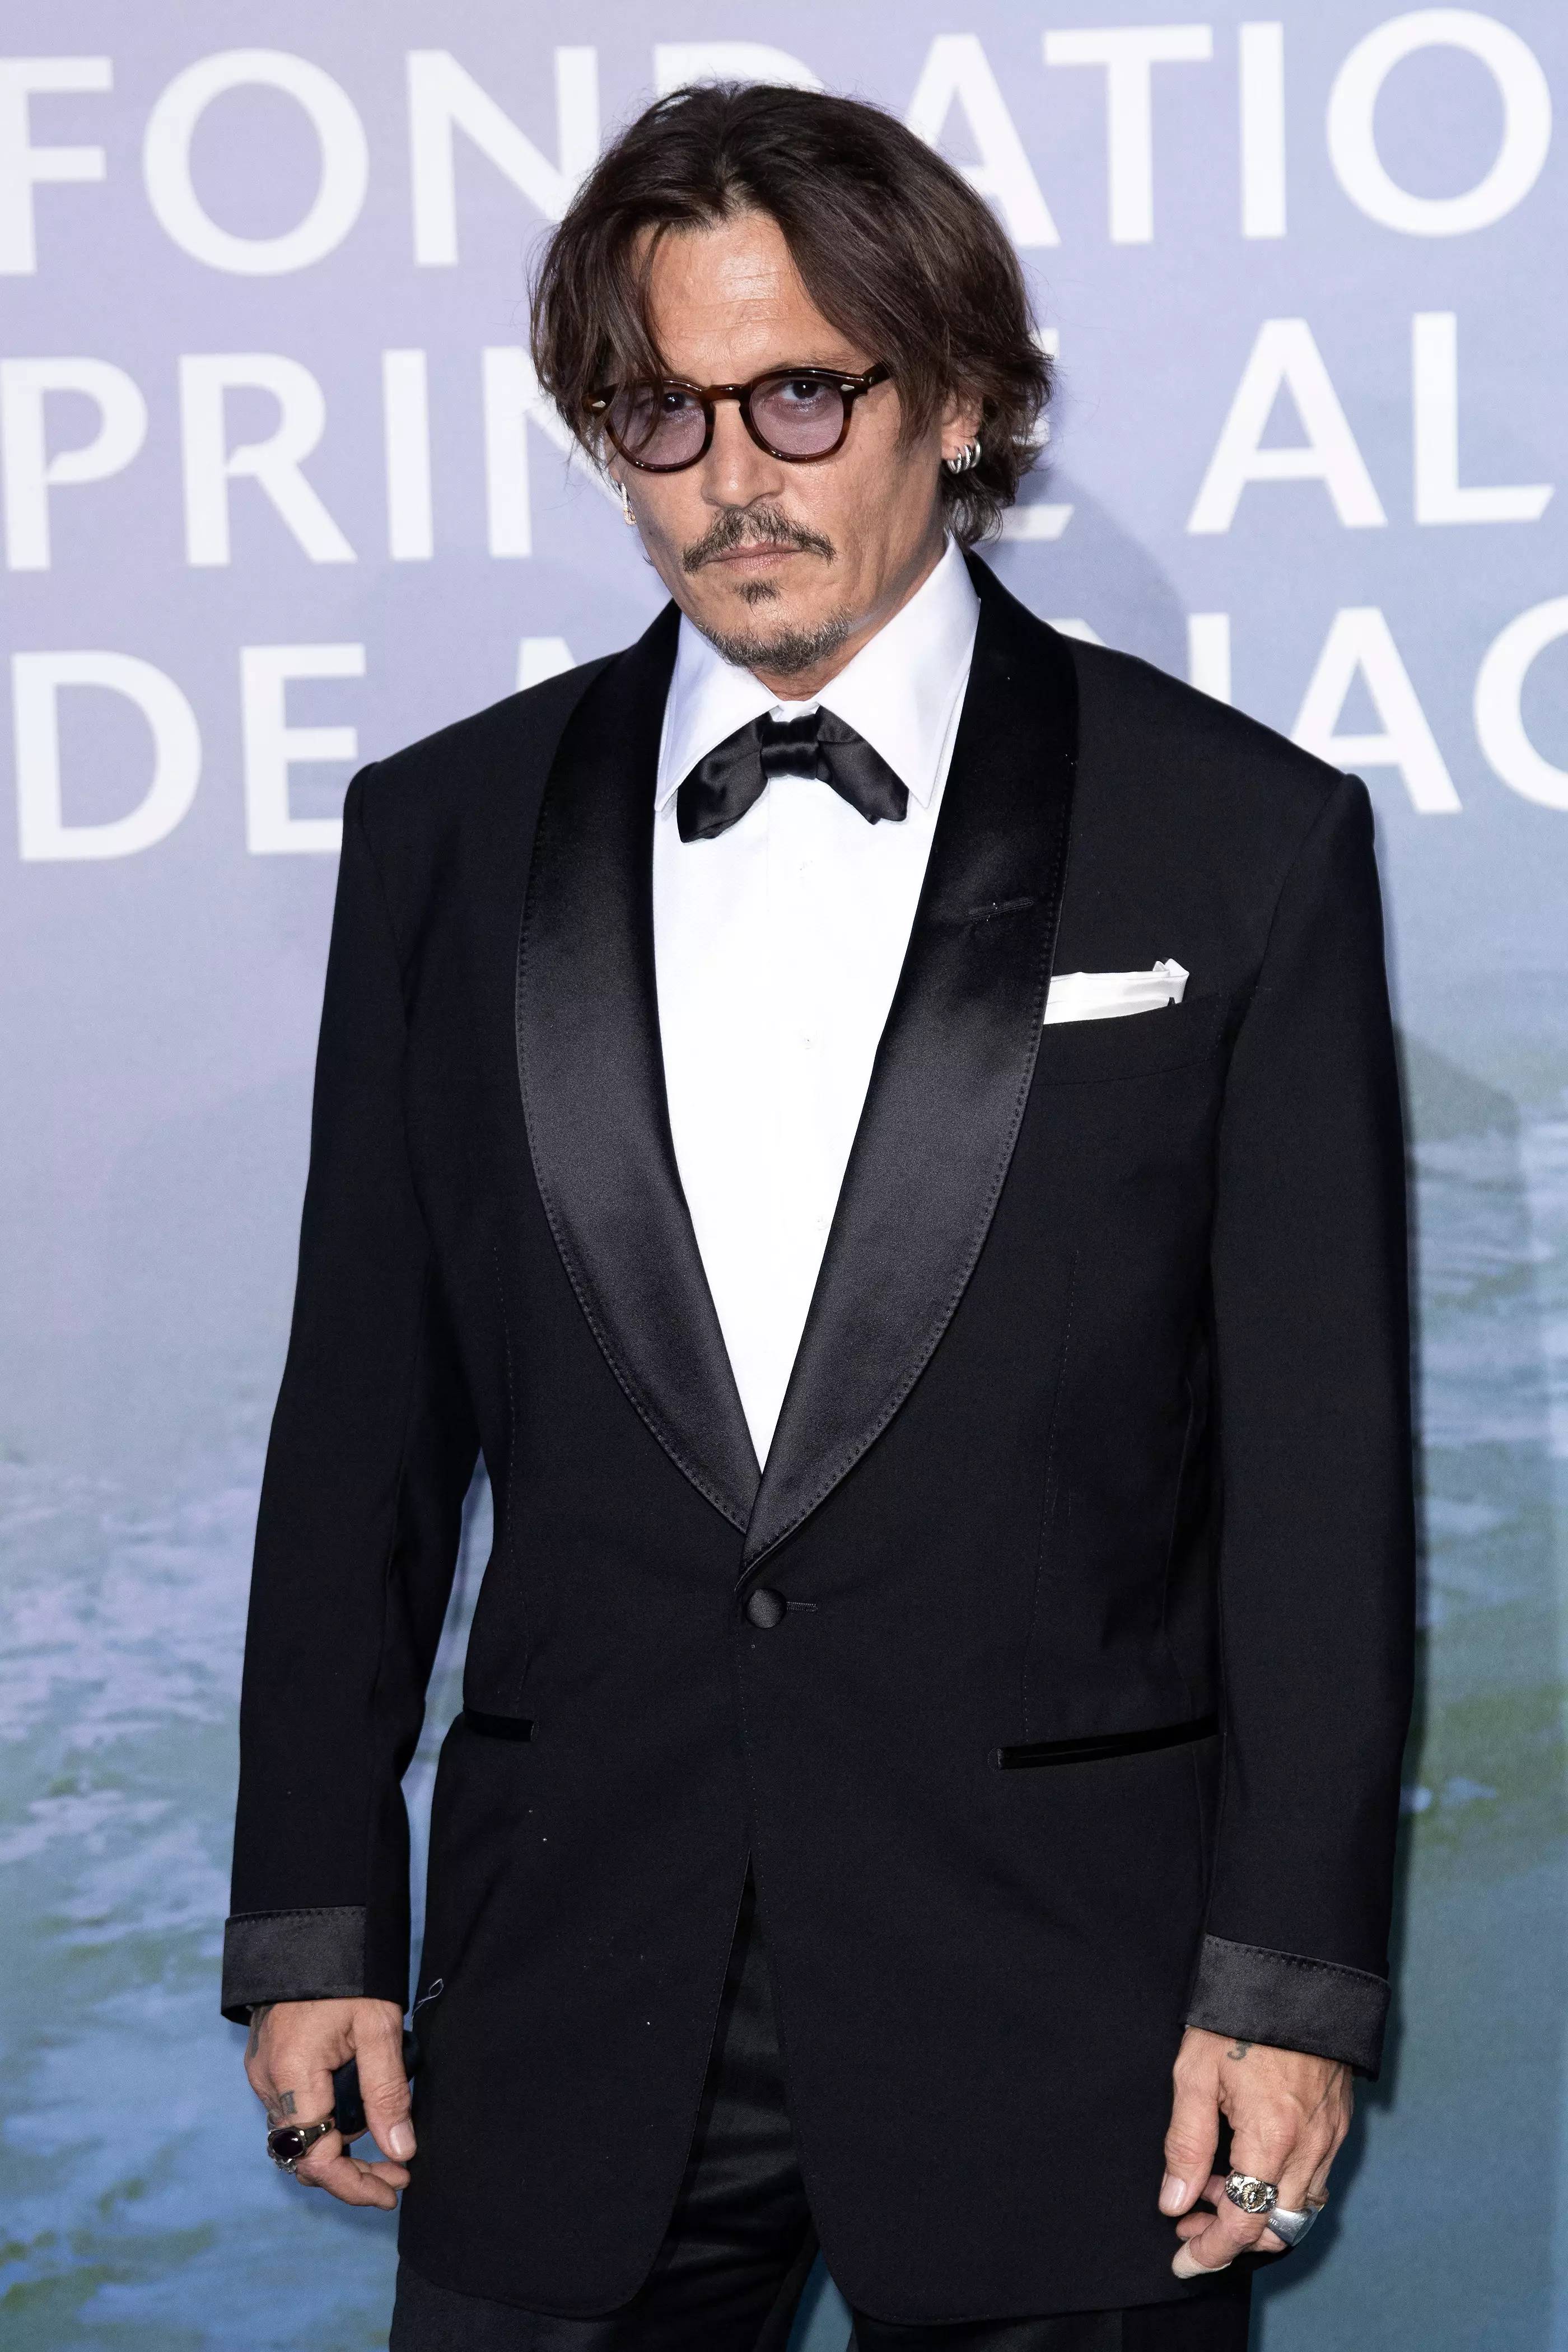 Depp confirmed that he will appeal the libel case.